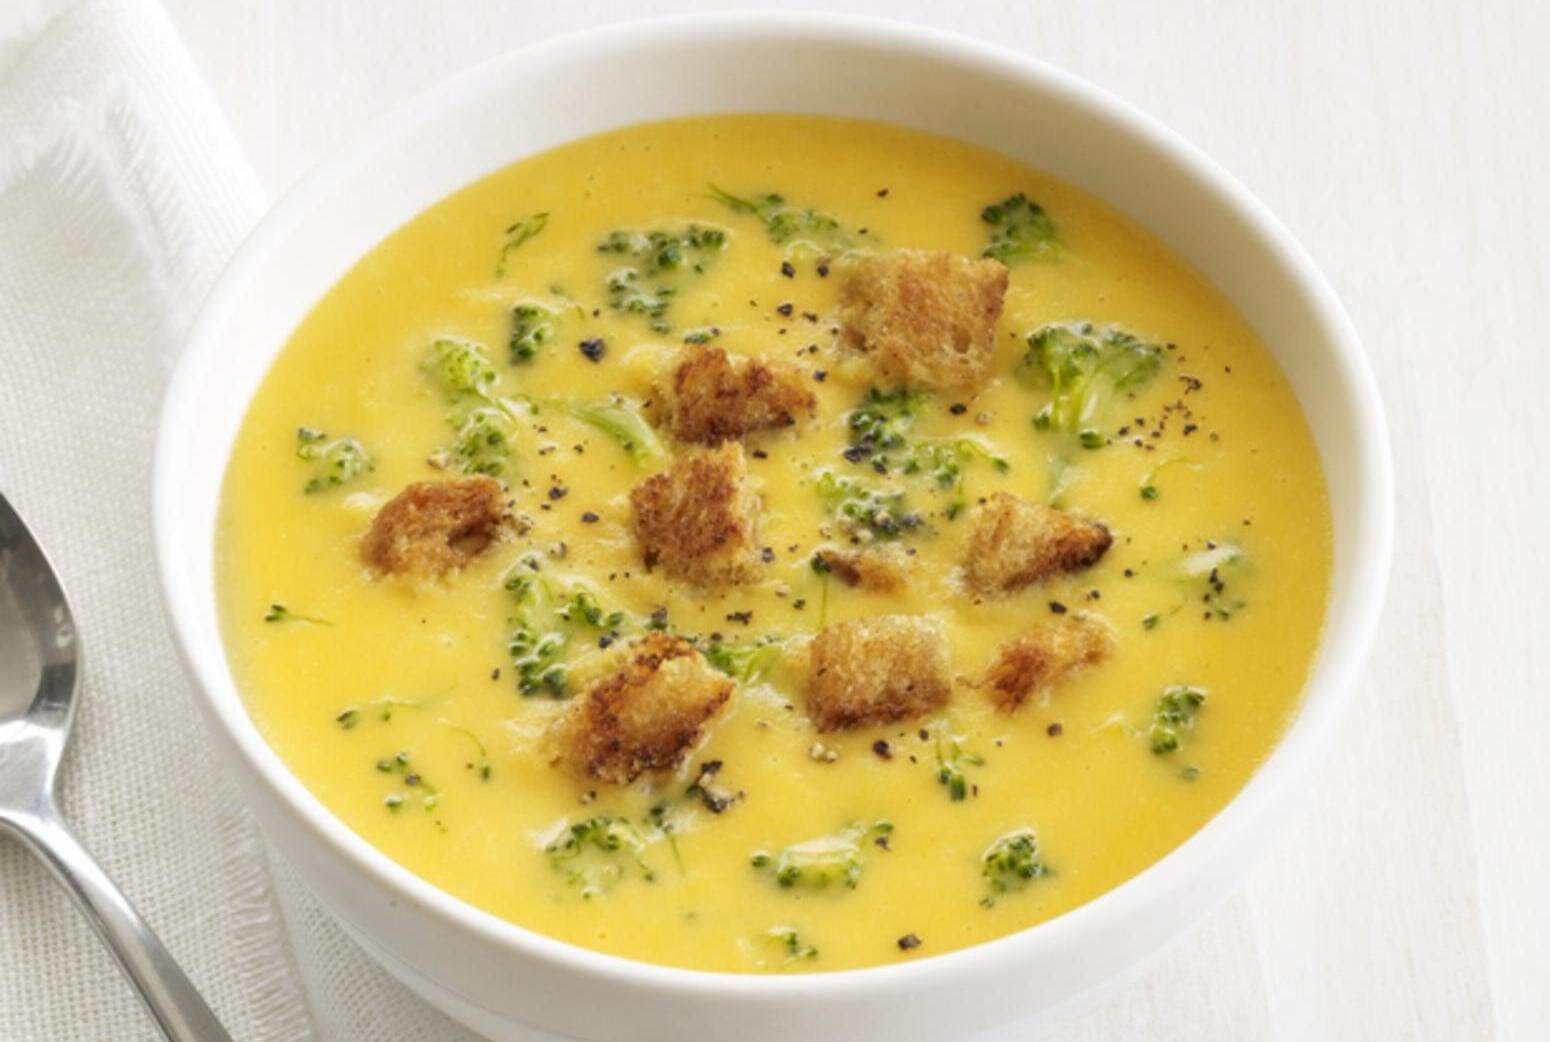 Soup with cheese croutons, like in kindergarten: a recipe